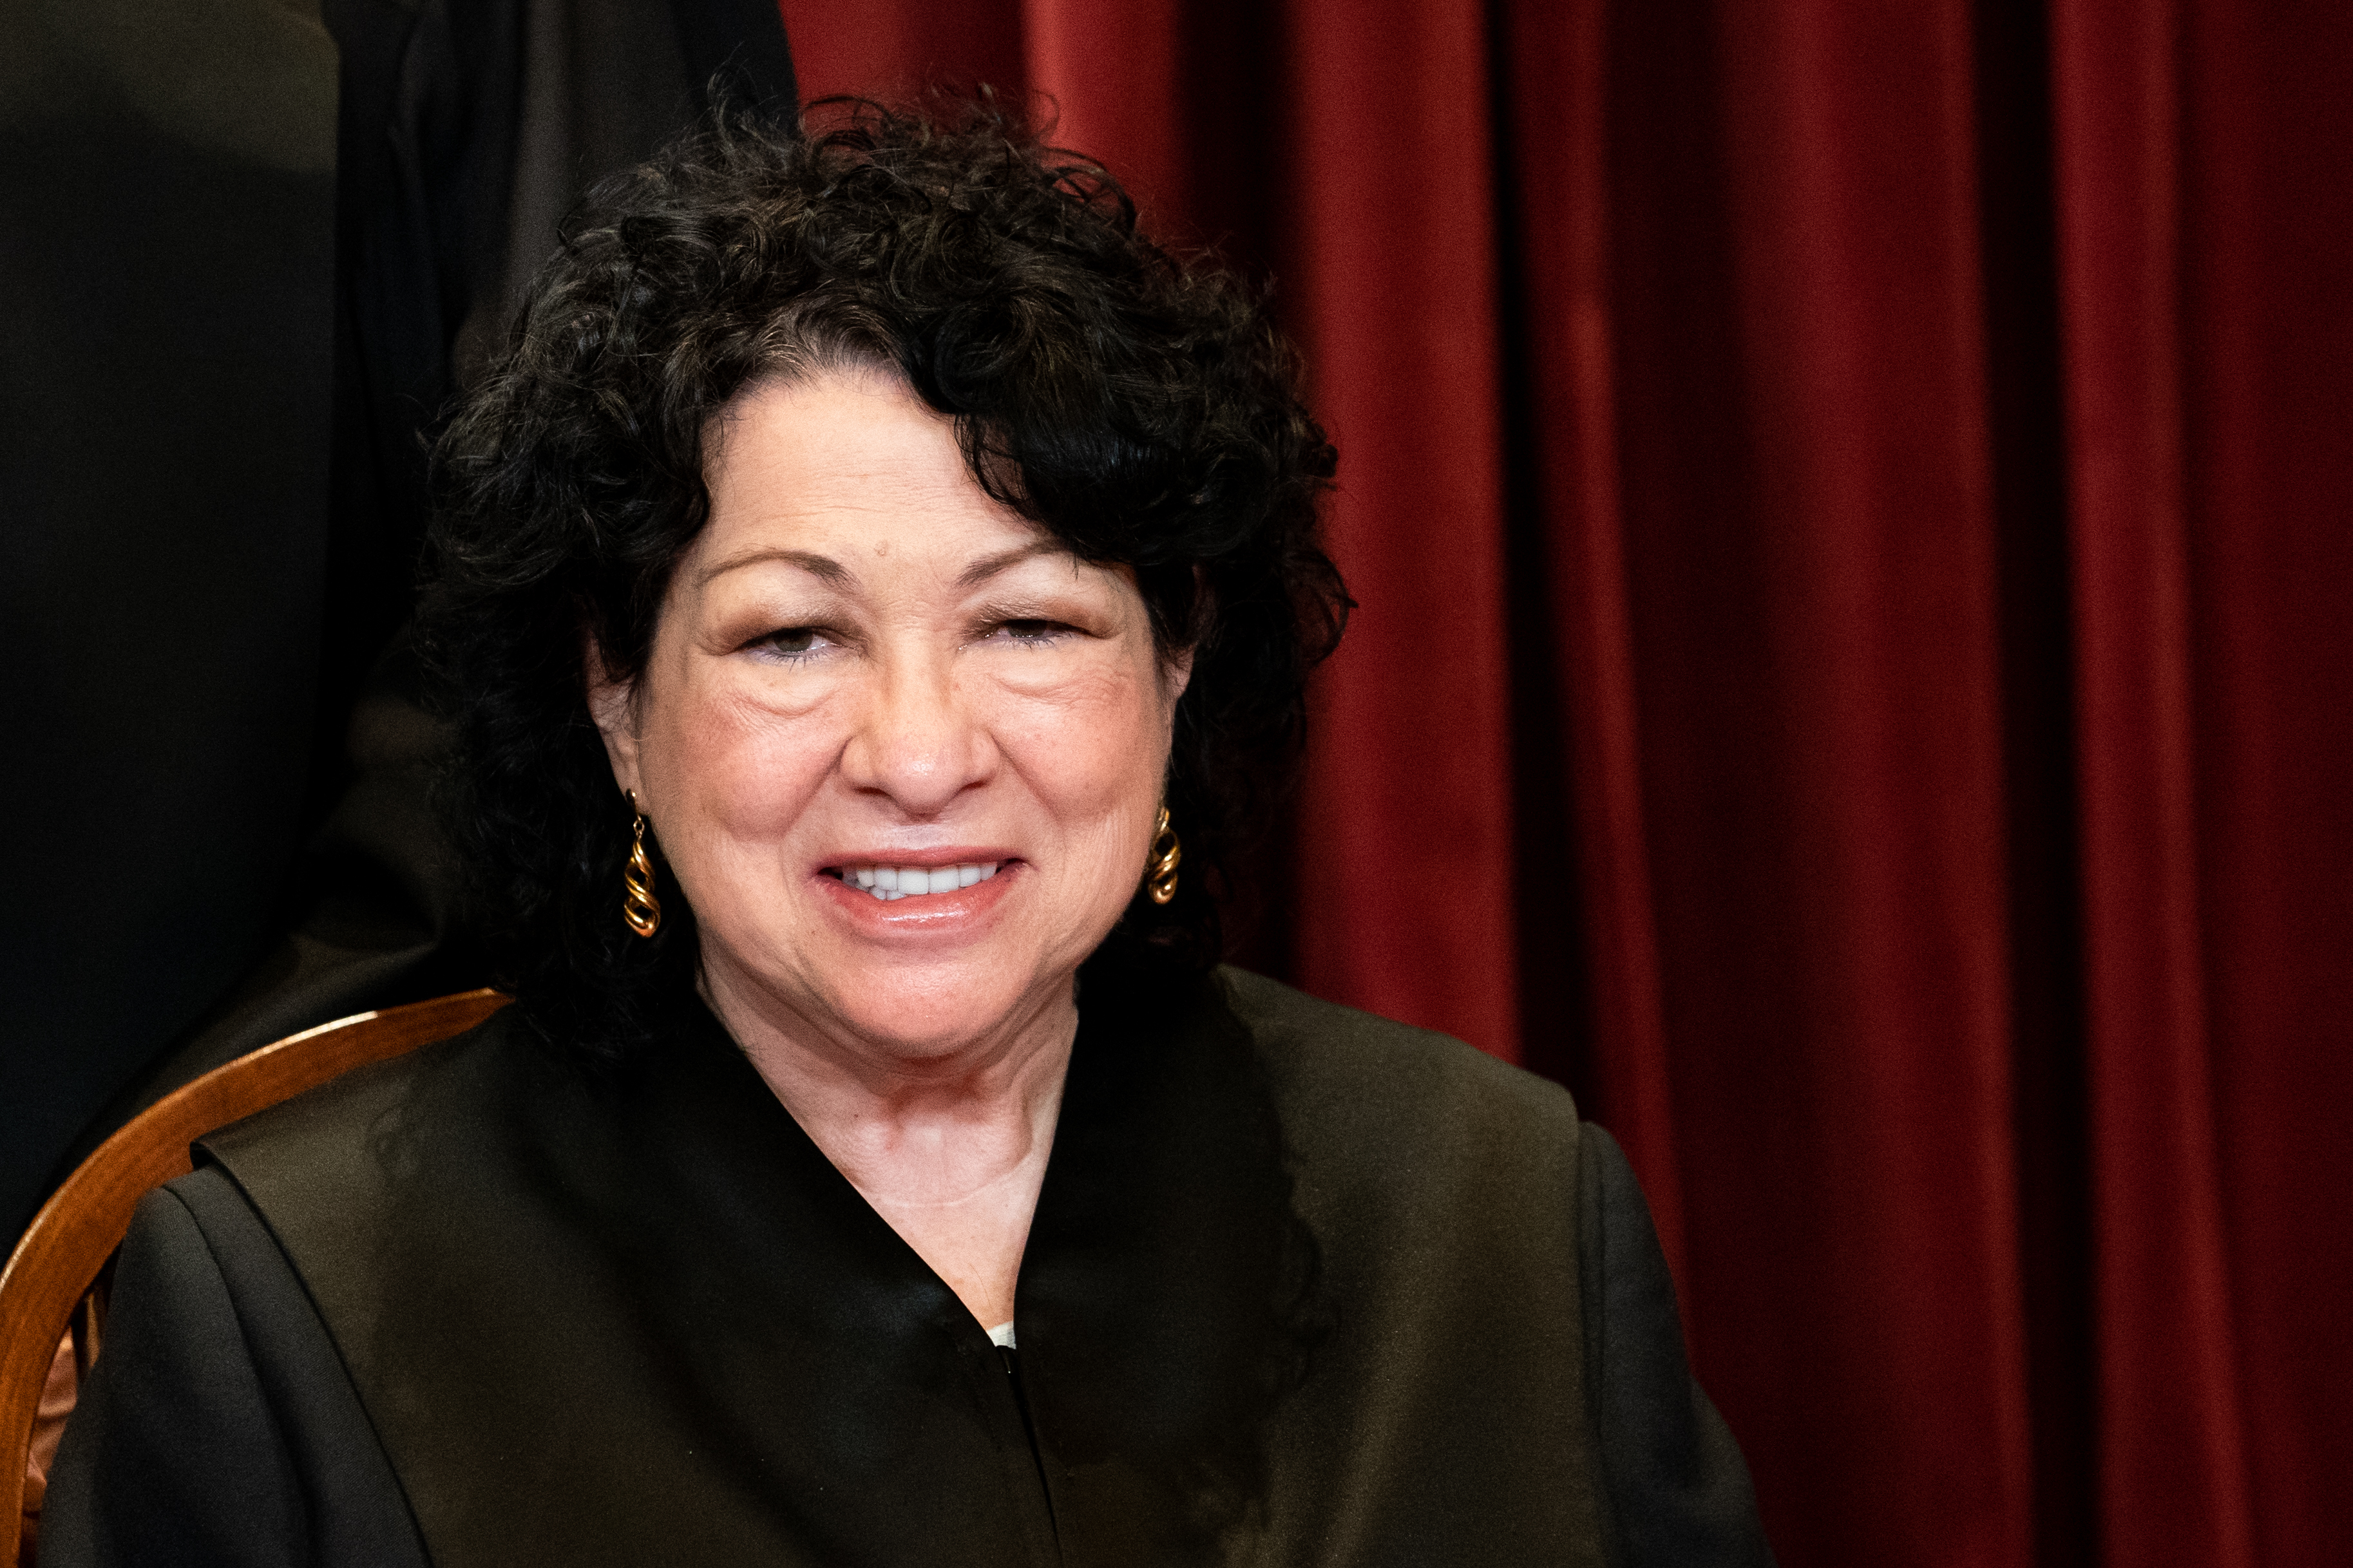 Sonia Sotomayor, associate justice of the U.S. Supreme Court, in Washington, DC, on April 23, 2021. 